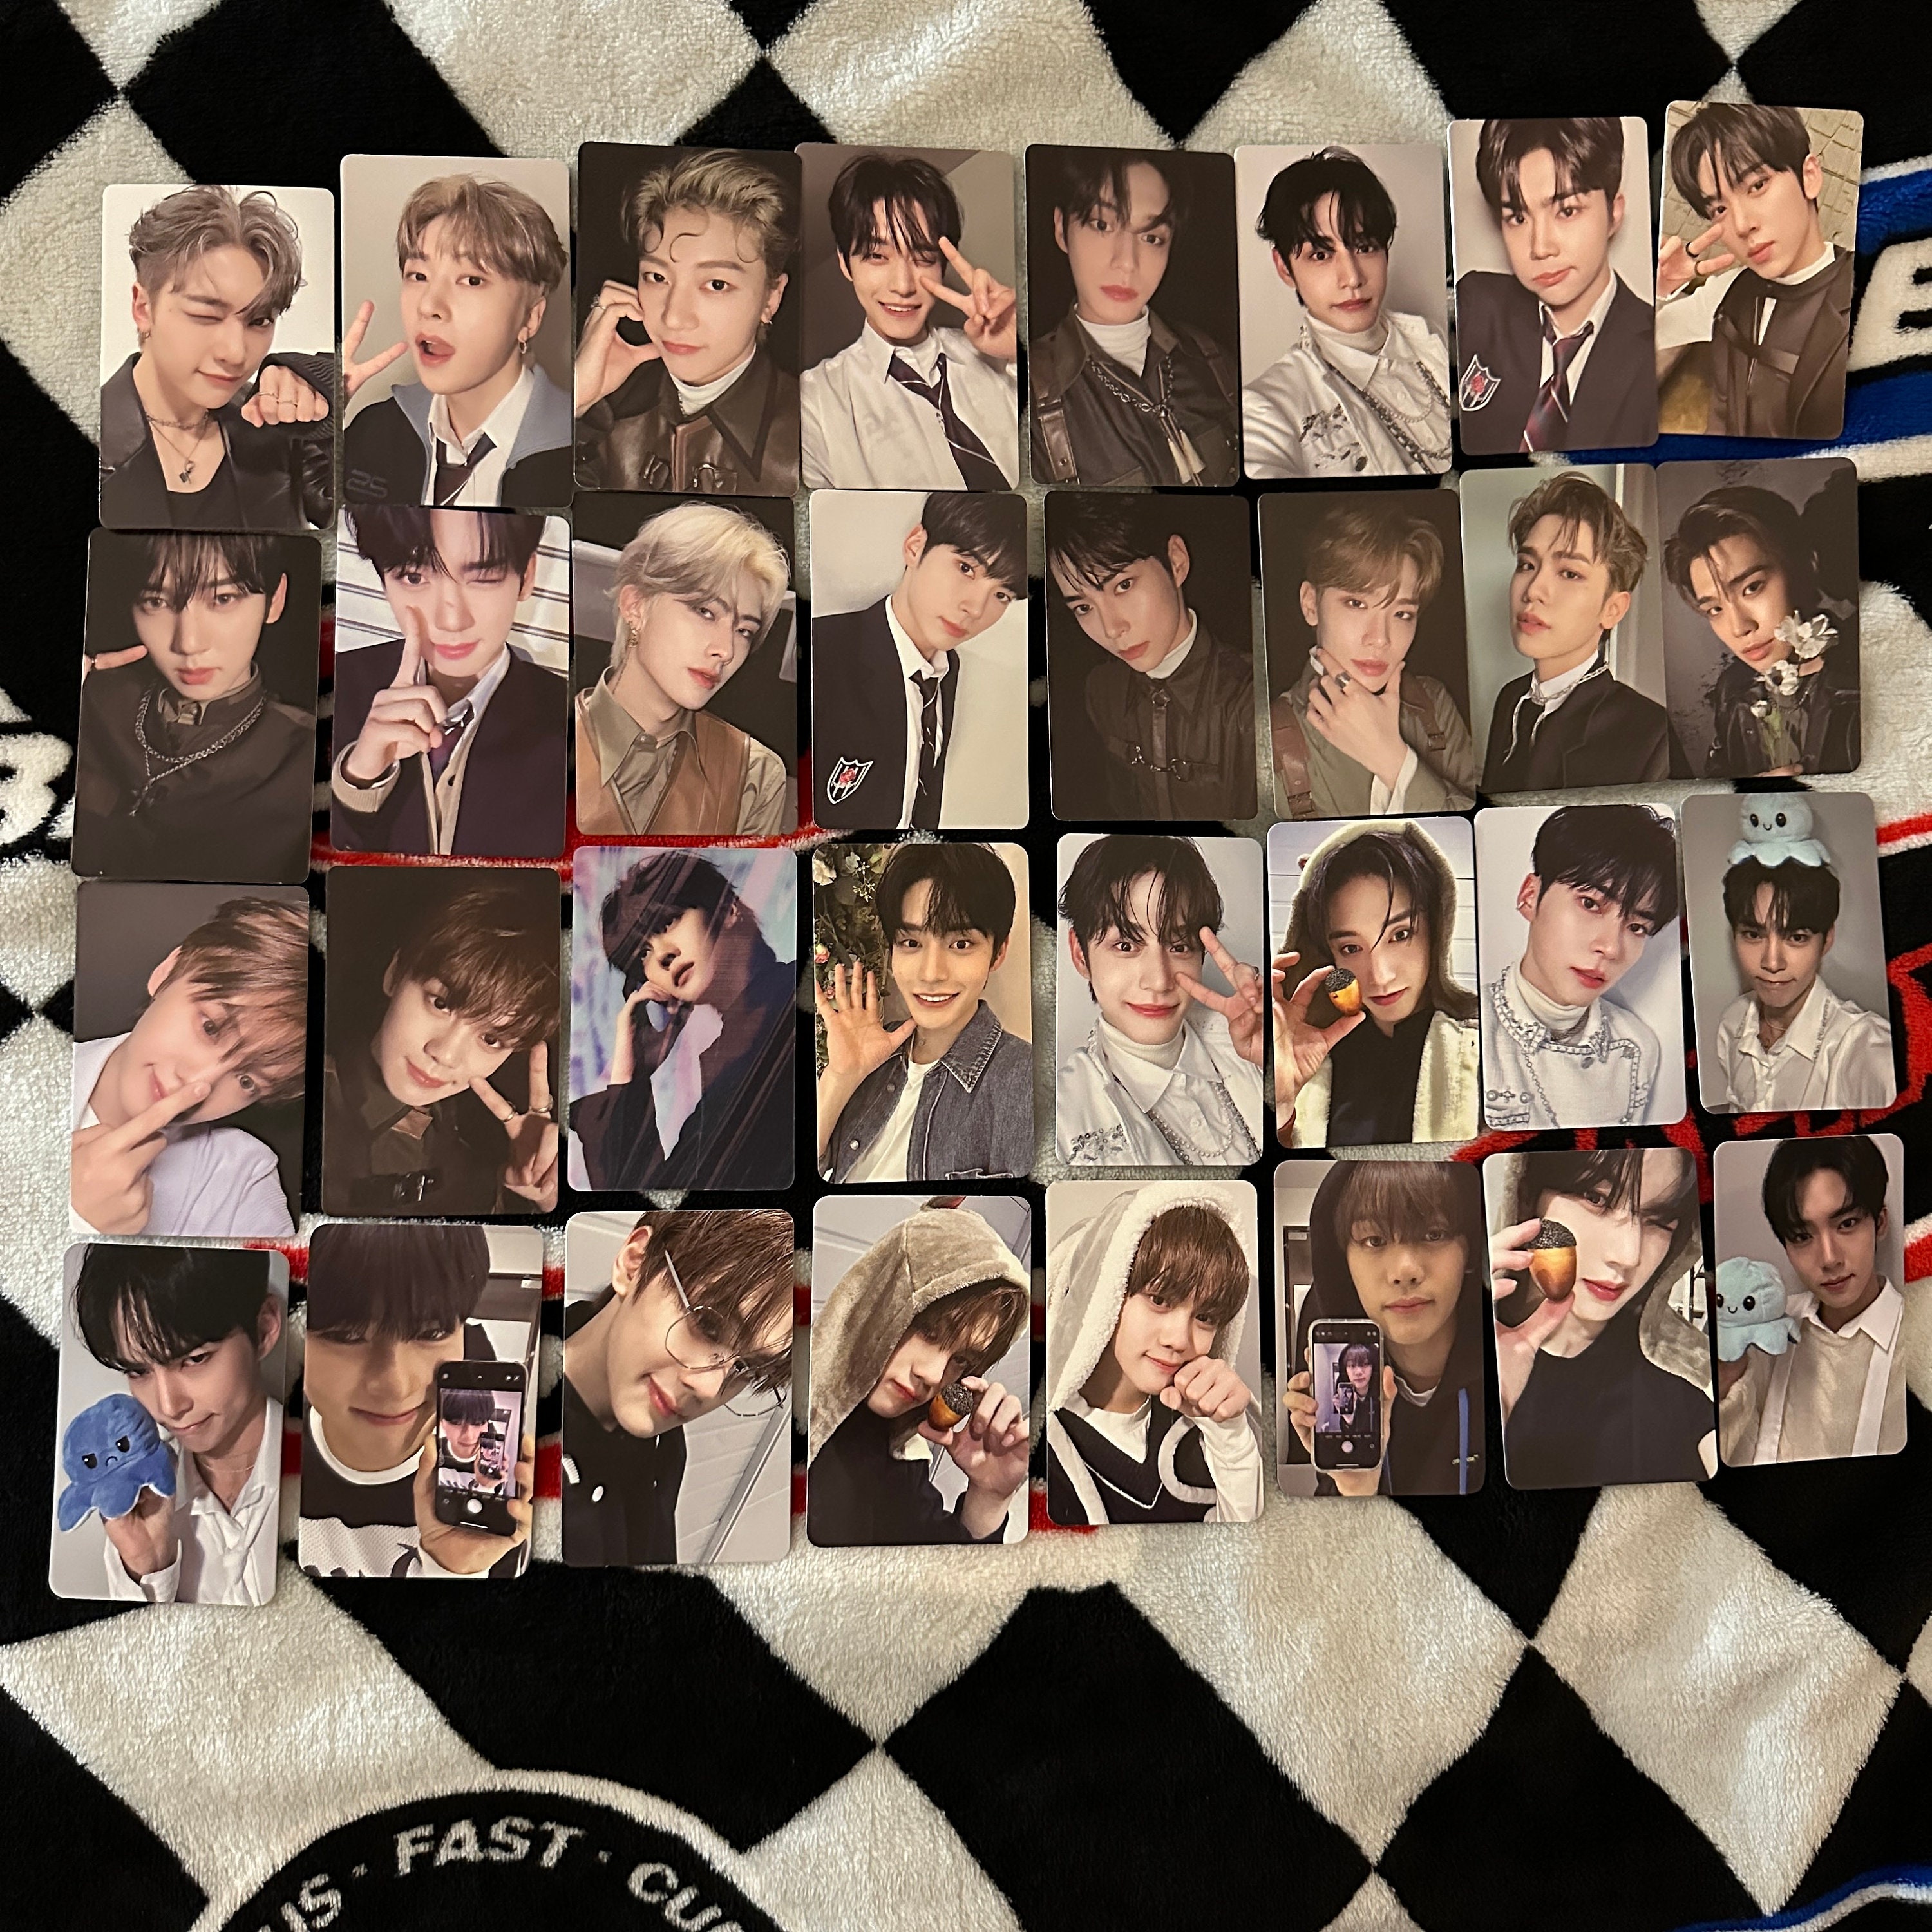 6 Pcs Kpop Photocard Holder 2.1 x 3.3 Inch Kpop Cardholder Plastic Cover  Holder Korean Stickers Colorful Decorative Stickers for Photocards Confetti